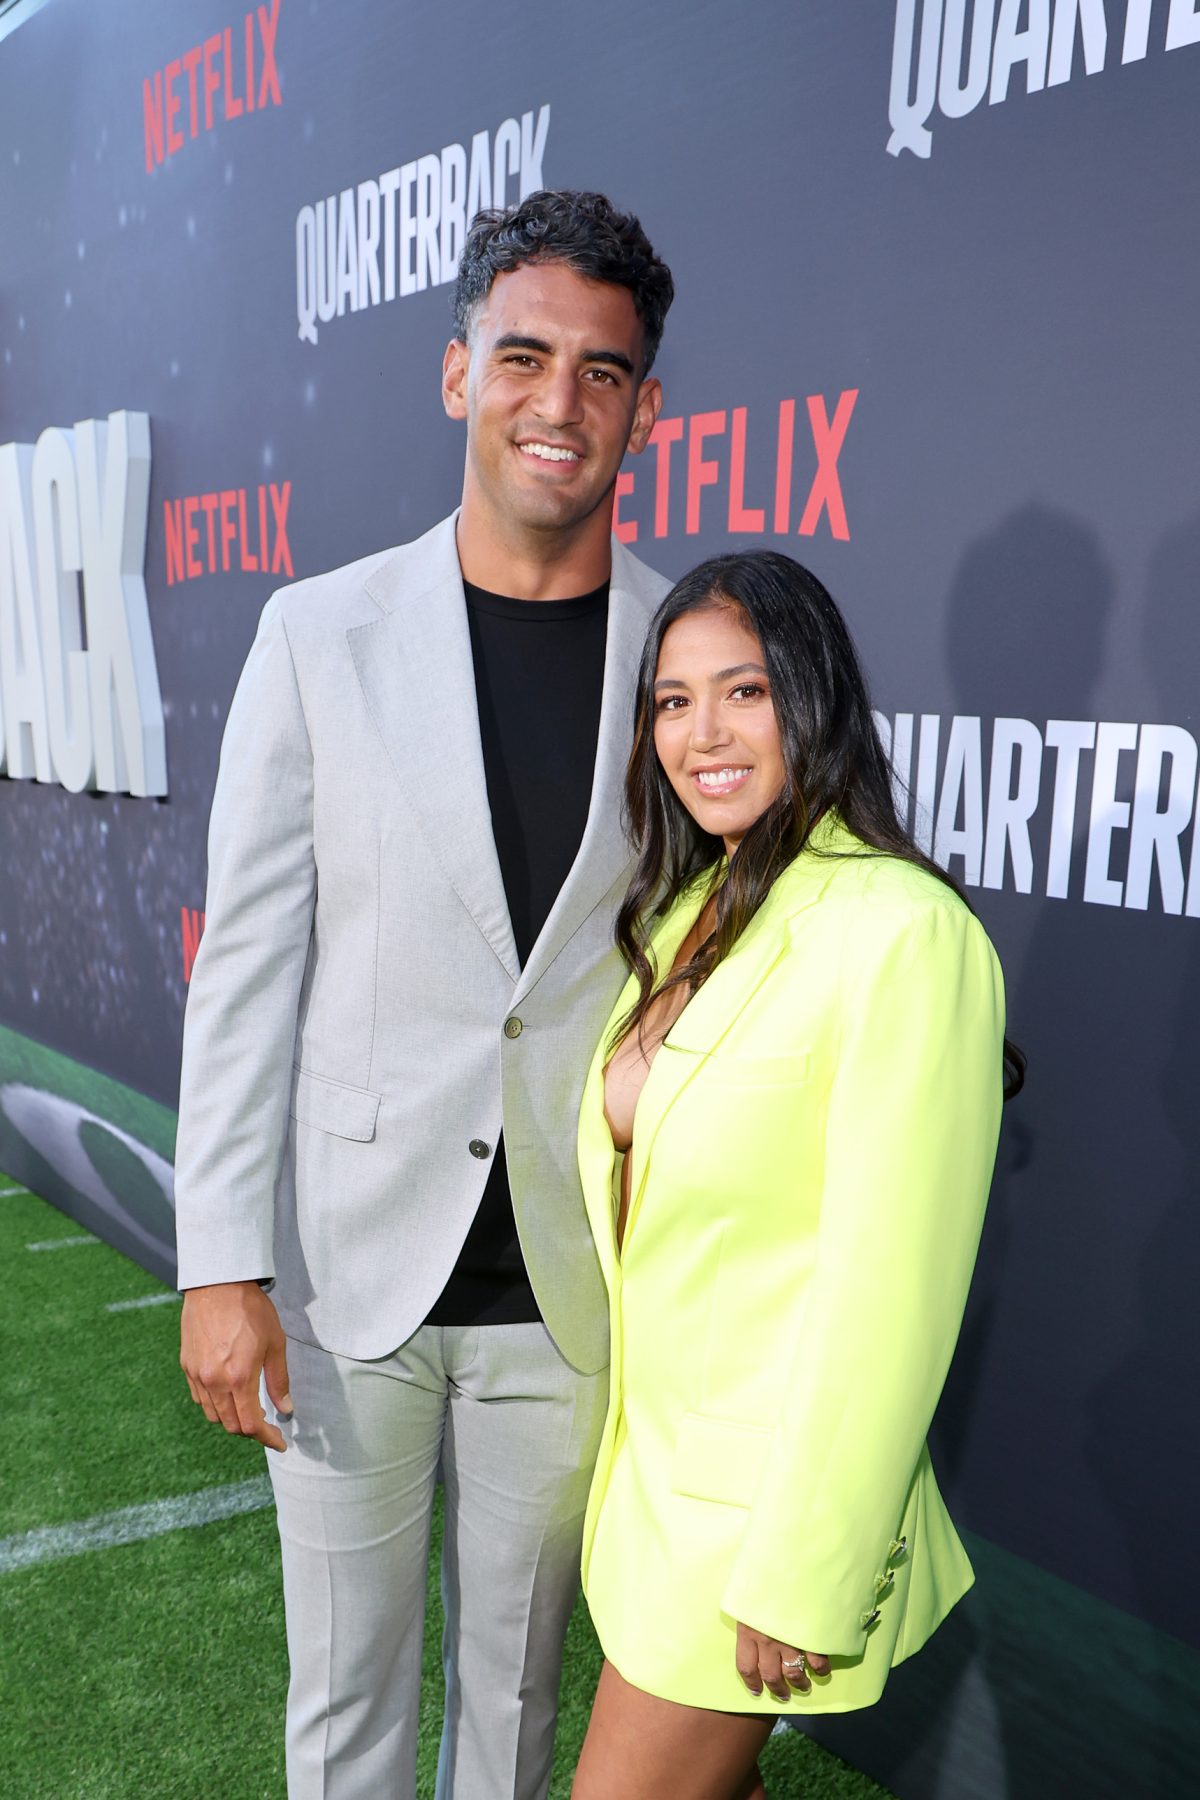 Marcus Mariota and Kiyomi Cook pose for photos at the Netflix premiere of 'Quarterback'